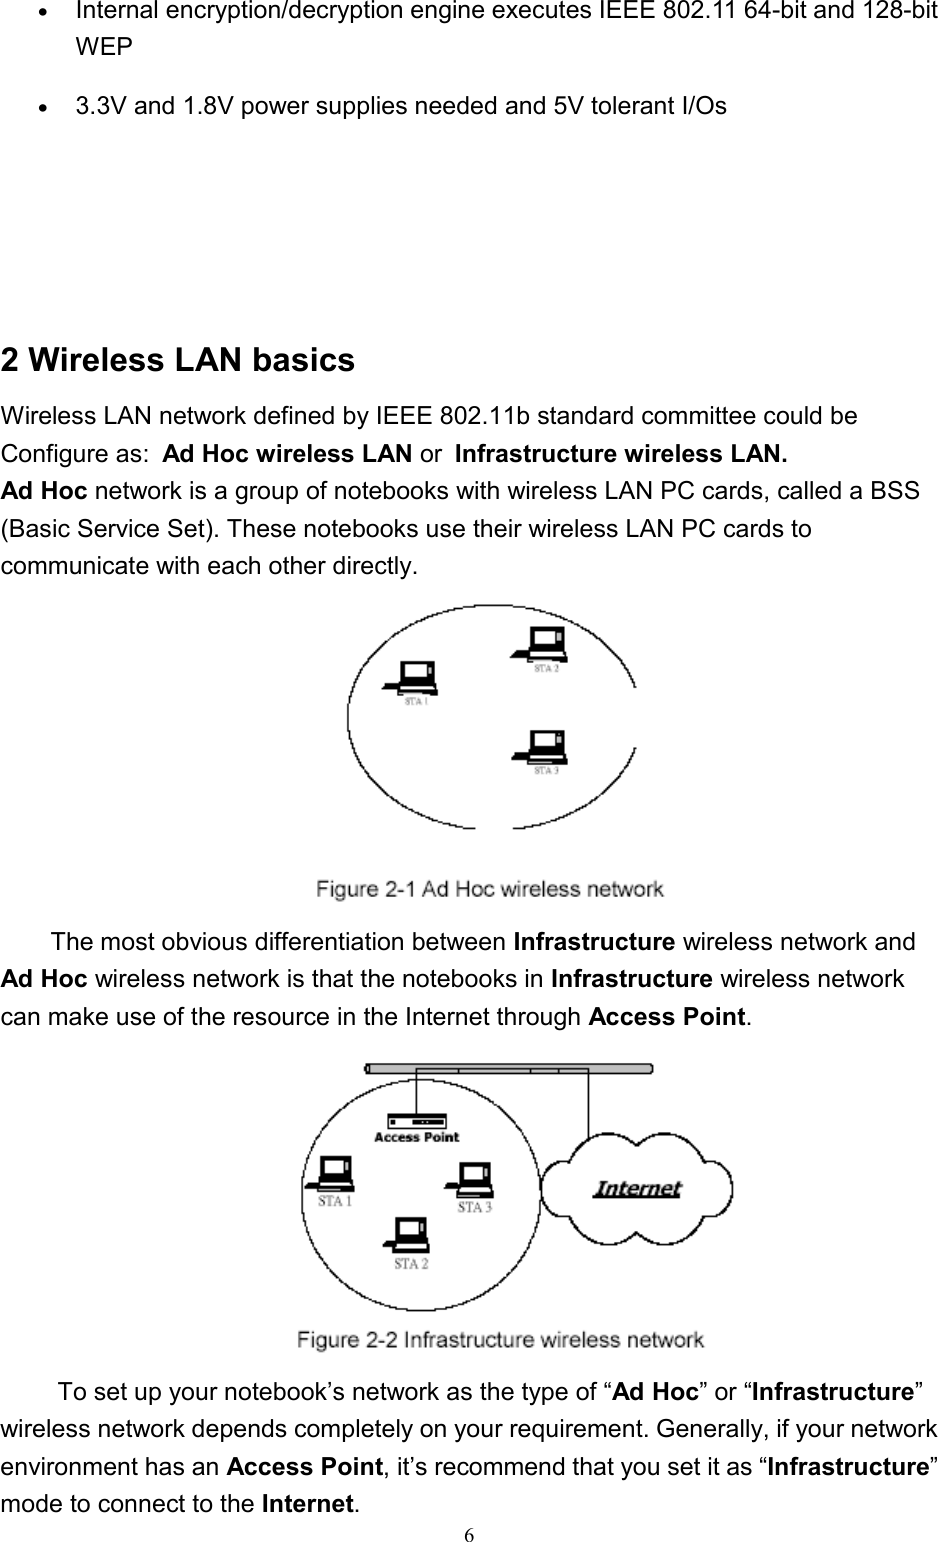 6• Internal encryption/decryption engine executes IEEE 802.11 64-bit and 128-bitWEP• 3.3V and 1.8V power supplies needed and 5V tolerant I/Os2 Wireless LAN basicsWireless LAN network defined by IEEE 802.11b standard committee could beConfigure as: Ad Hoc wireless LAN or Infrastructure wireless LAN.Ad Hoc network is a group of notebooks with wireless LAN PC cards, called a BSS(Basic Service Set). These notebooks use their wireless LAN PC cards tocommunicate with each other directly.The most obvious differentiation between Infrastructure wireless network andAd Hoc wireless network is that the notebooks in Infrastructure wireless networkcan make use of the resource in the Internet through Access Point. To set up your notebook’s network as the type of “Ad Hoc” or “Infrastructure”wireless network depends completely on your requirement. Generally, if your networkenvironment has an Access Point, it’s recommend that you set it as “Infrastructure”mode to connect to the Internet.